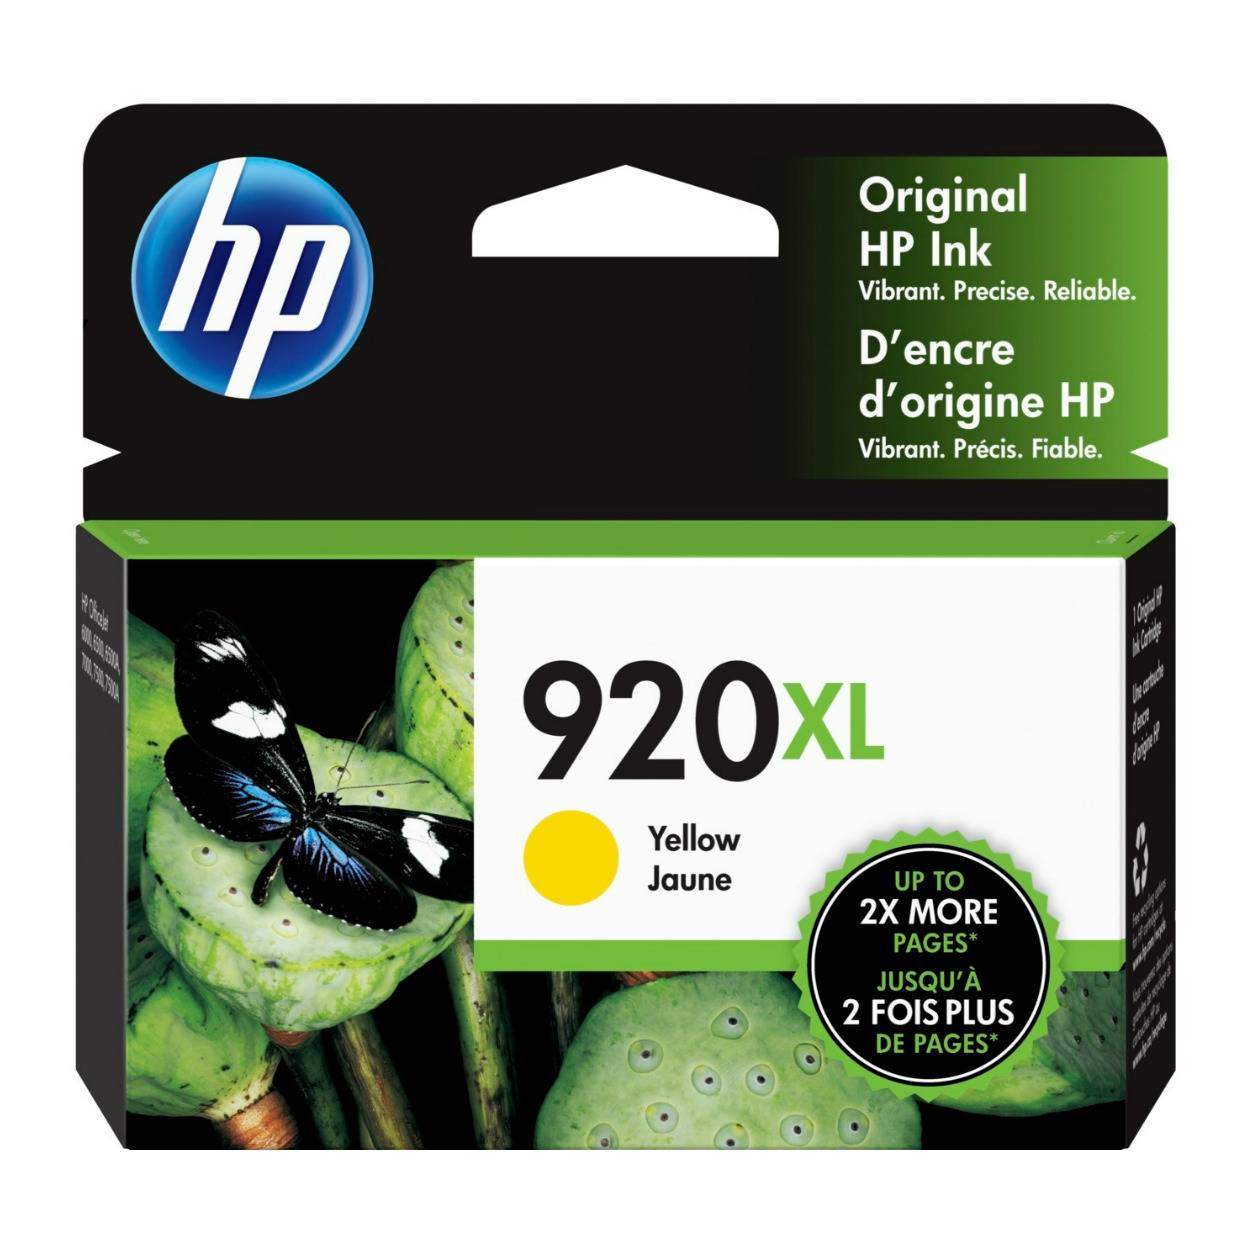 HP 920XL High Yield, Fade-Resistant, and Vivid Color Yellow Original Ink Cartridge (700 Pages)